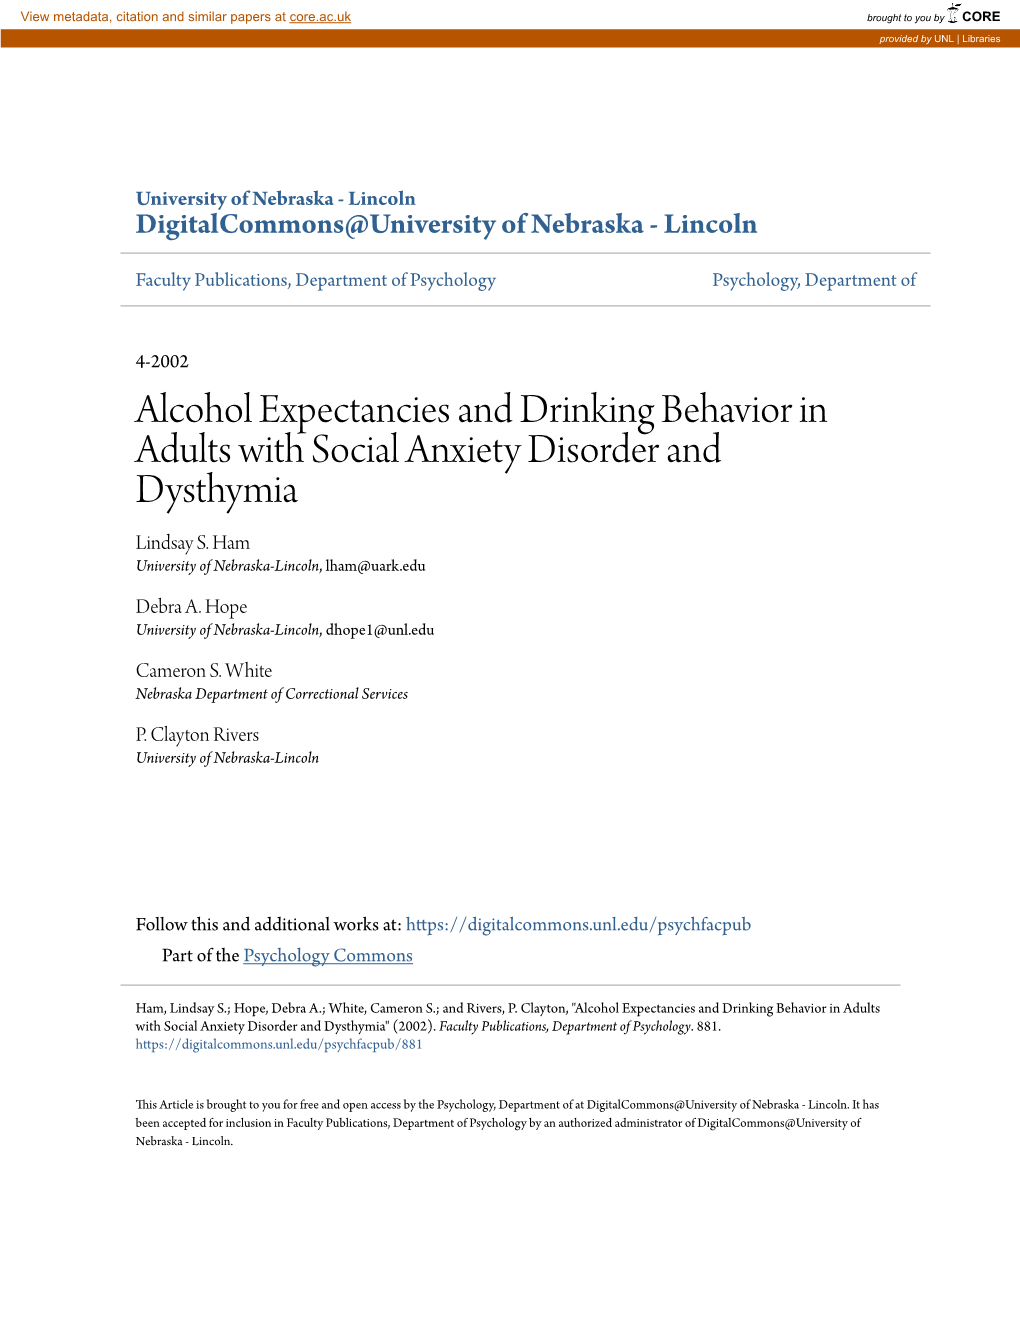 Alcohol Expectancies and Drinking Behavior in Adults with Social Anxiety Disorder and Dysthymia Lindsay S